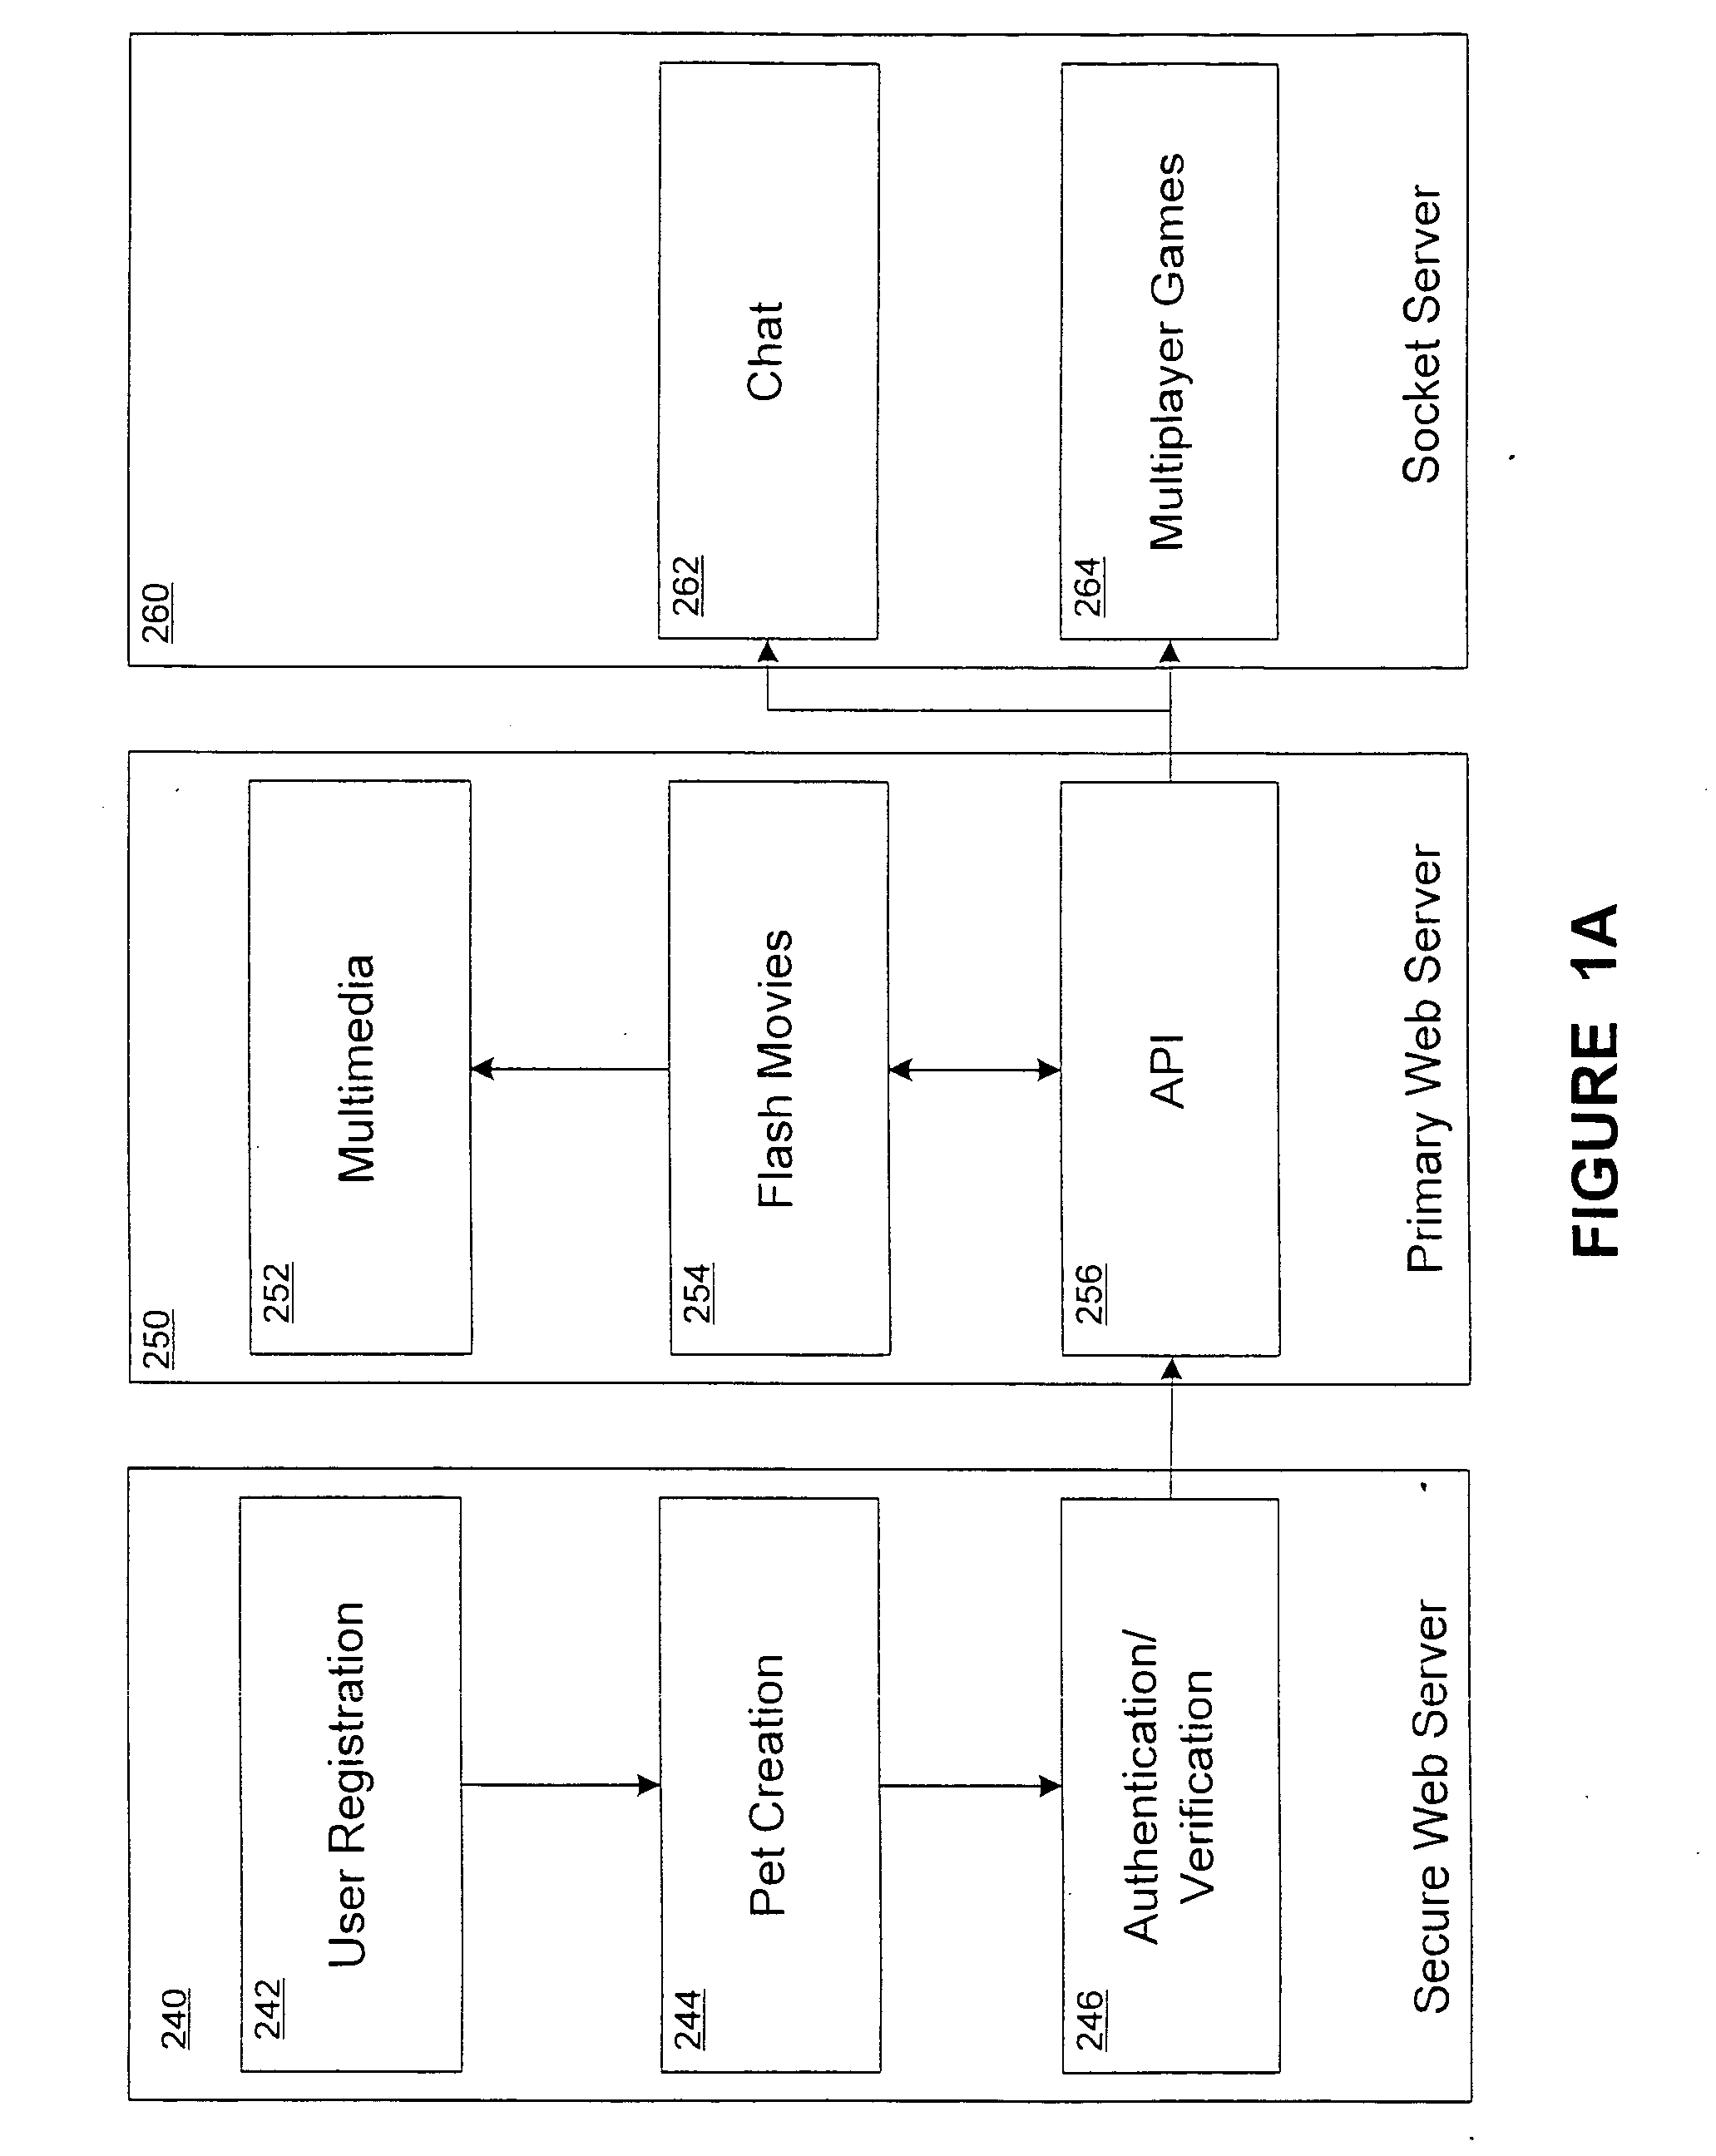 System and method for toy adoption and marketing